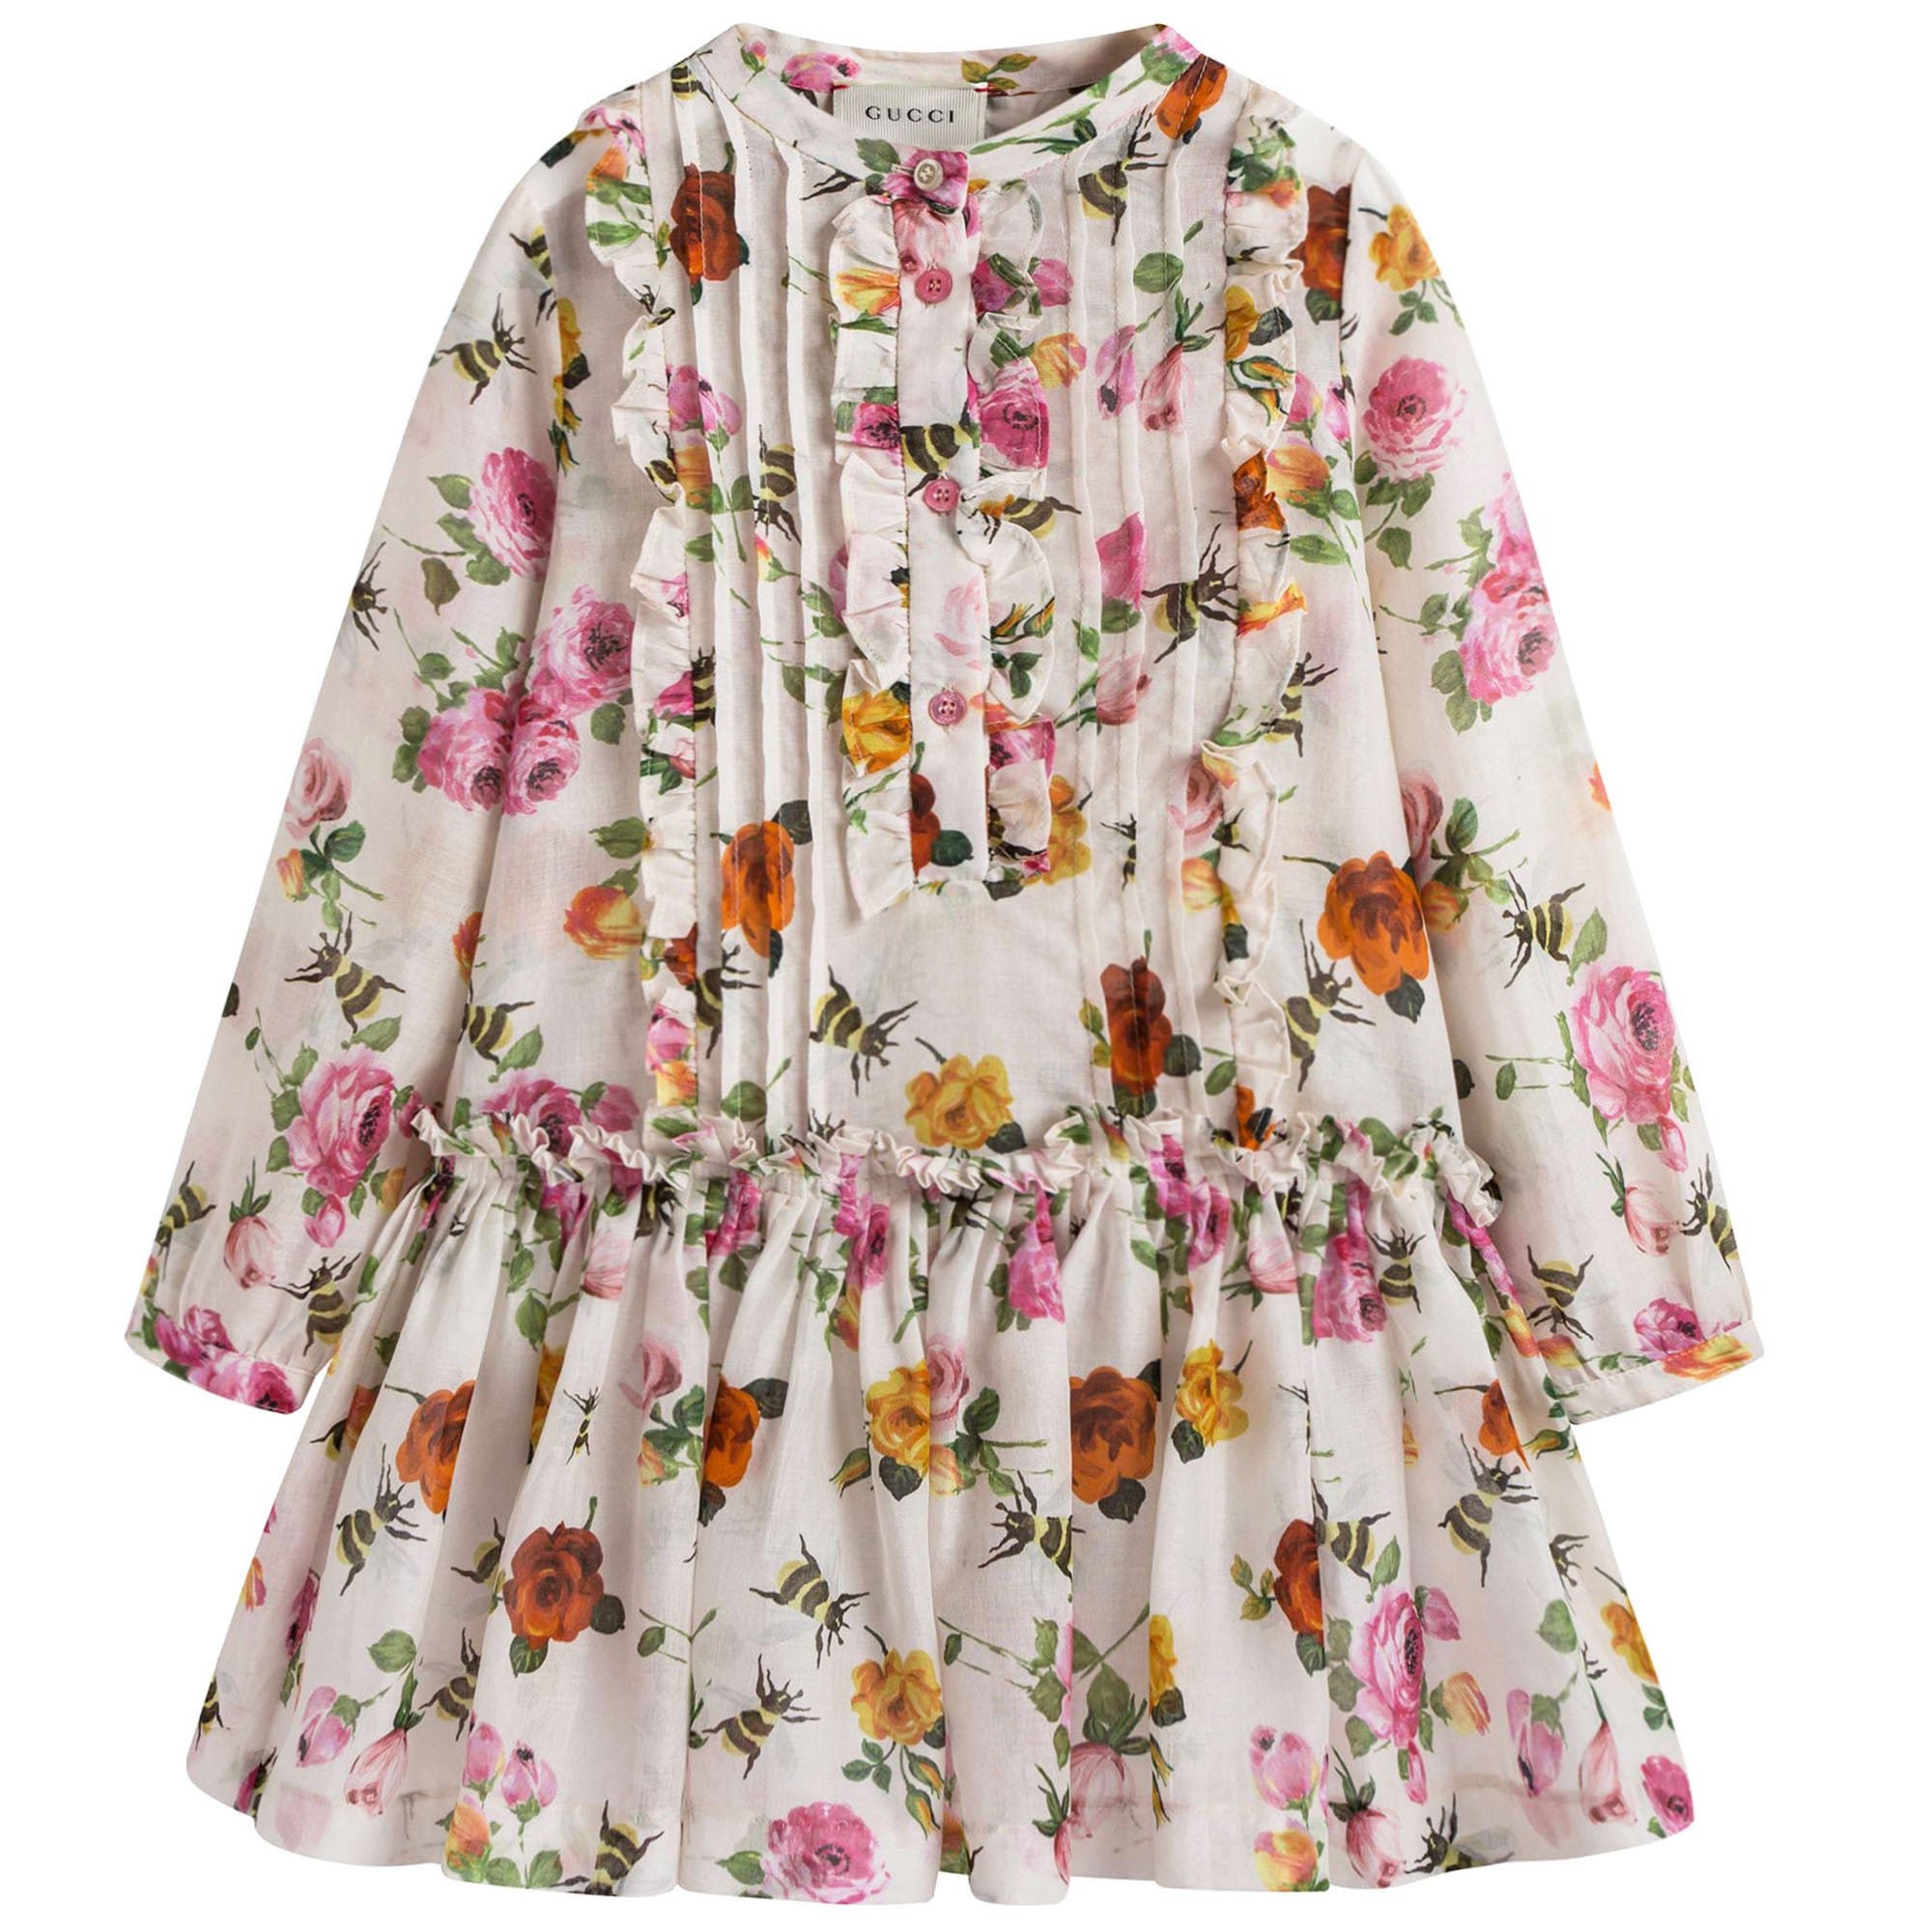 Girls White Cotton Dress With Multicolor Flower Print Trims